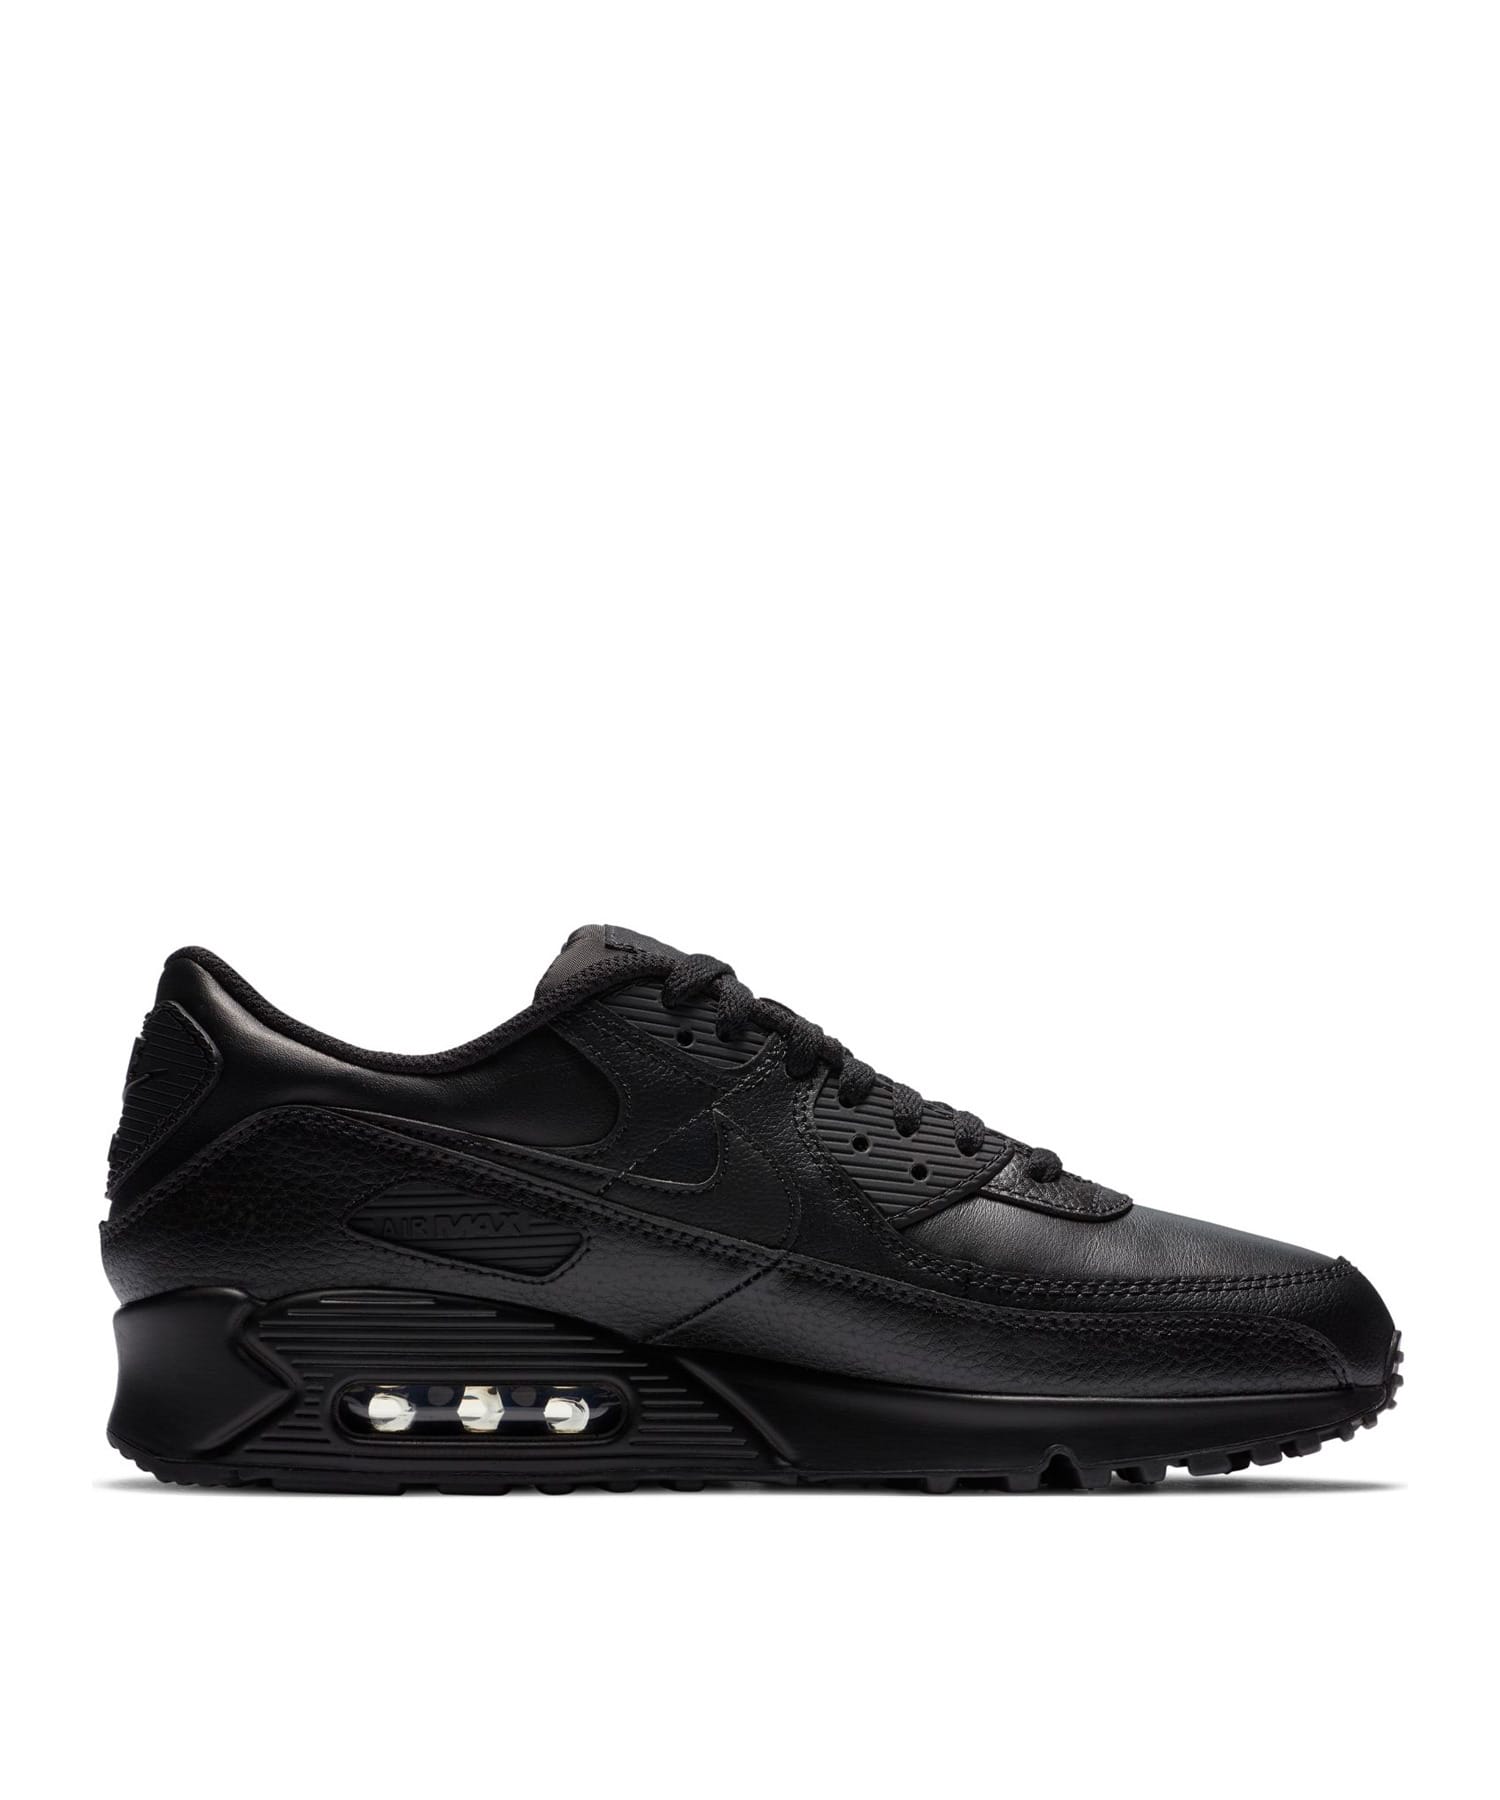 NIKE AIR MAX 90 LTR｜ESTNATION ONLINE STORE｜エストネーション 公式通販